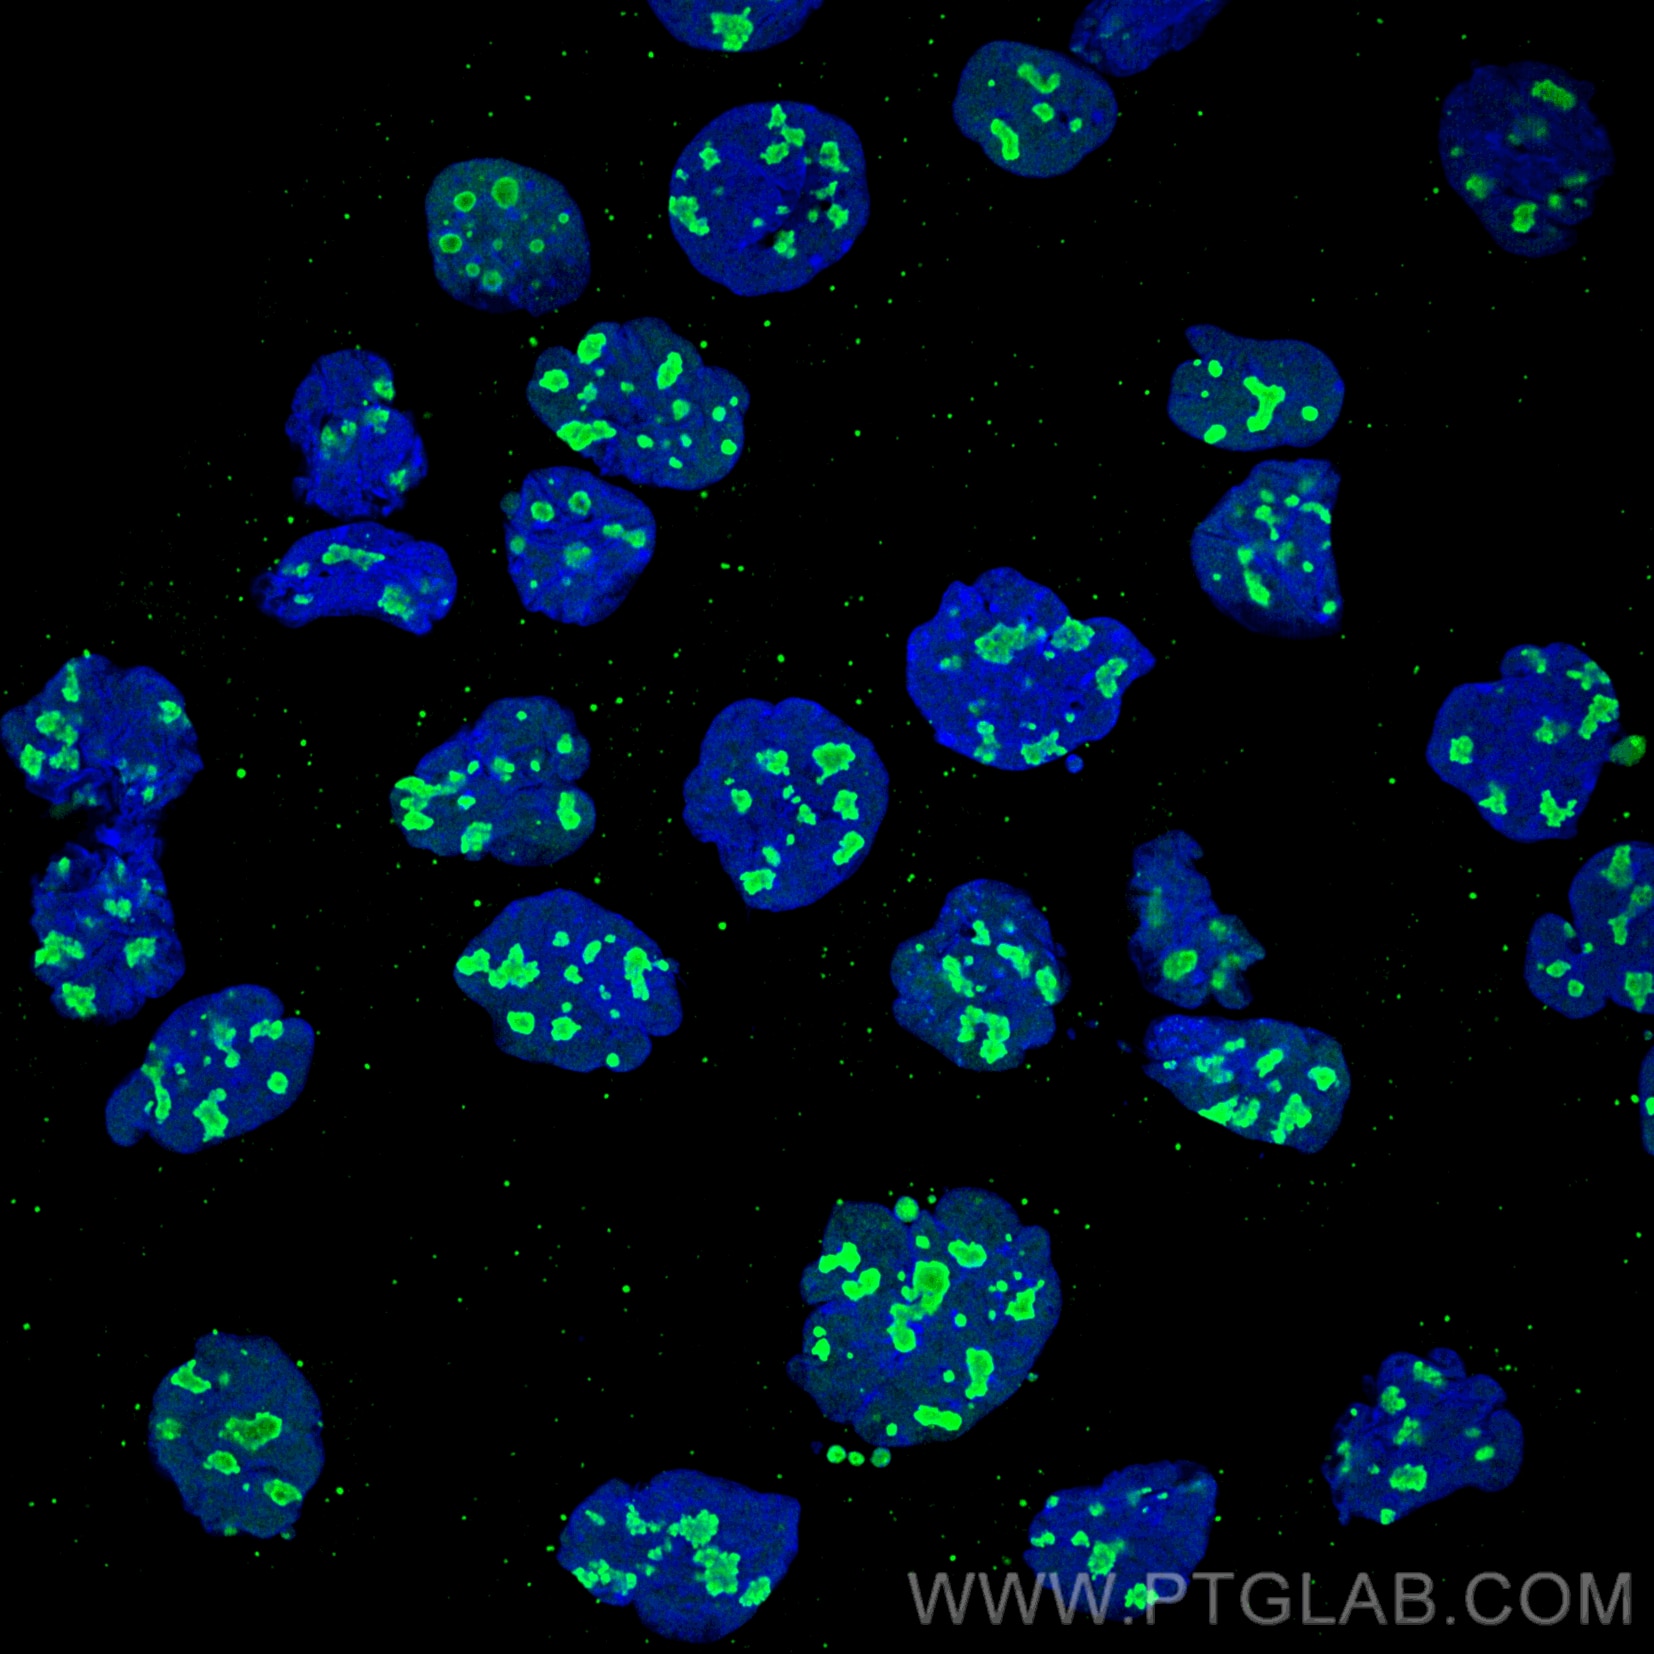 Immunofluorescence analysis of A431 cells stained with rabbit anti-NCL antibody (10556-1-AP, green) and Nano-Secondary® alpaca anti-rabbit IgG, recombinant VHH, CoraLite® Plus 488 (srb2GCL488-1), 1:500. Nuclei were stained with DAPI (blue). Images were recorded at the Core Facility Bioimaging at the Biomedical Center, LMU Munich.